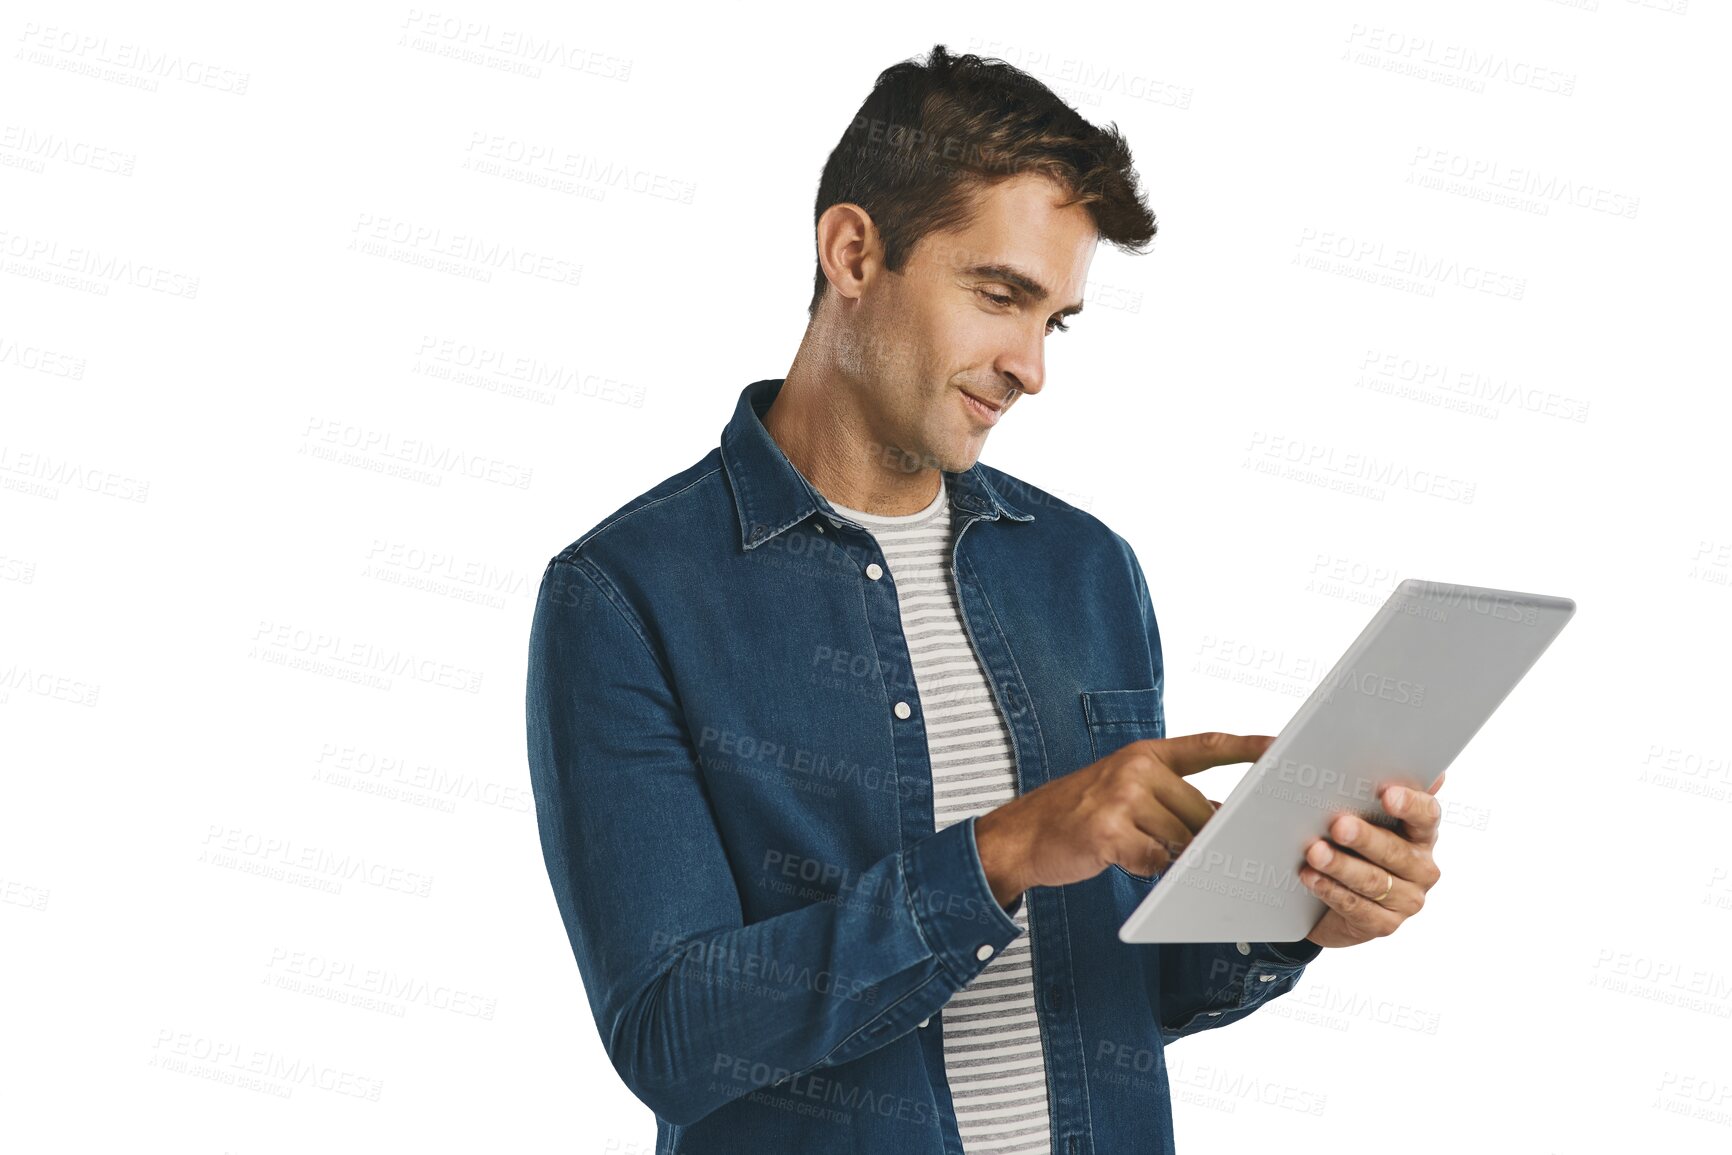 Buy stock photo Search, tablet and man on internet, typing and social media isolated on a transparent png background. Technology, scroll and person on app, network and reading email notification online on website